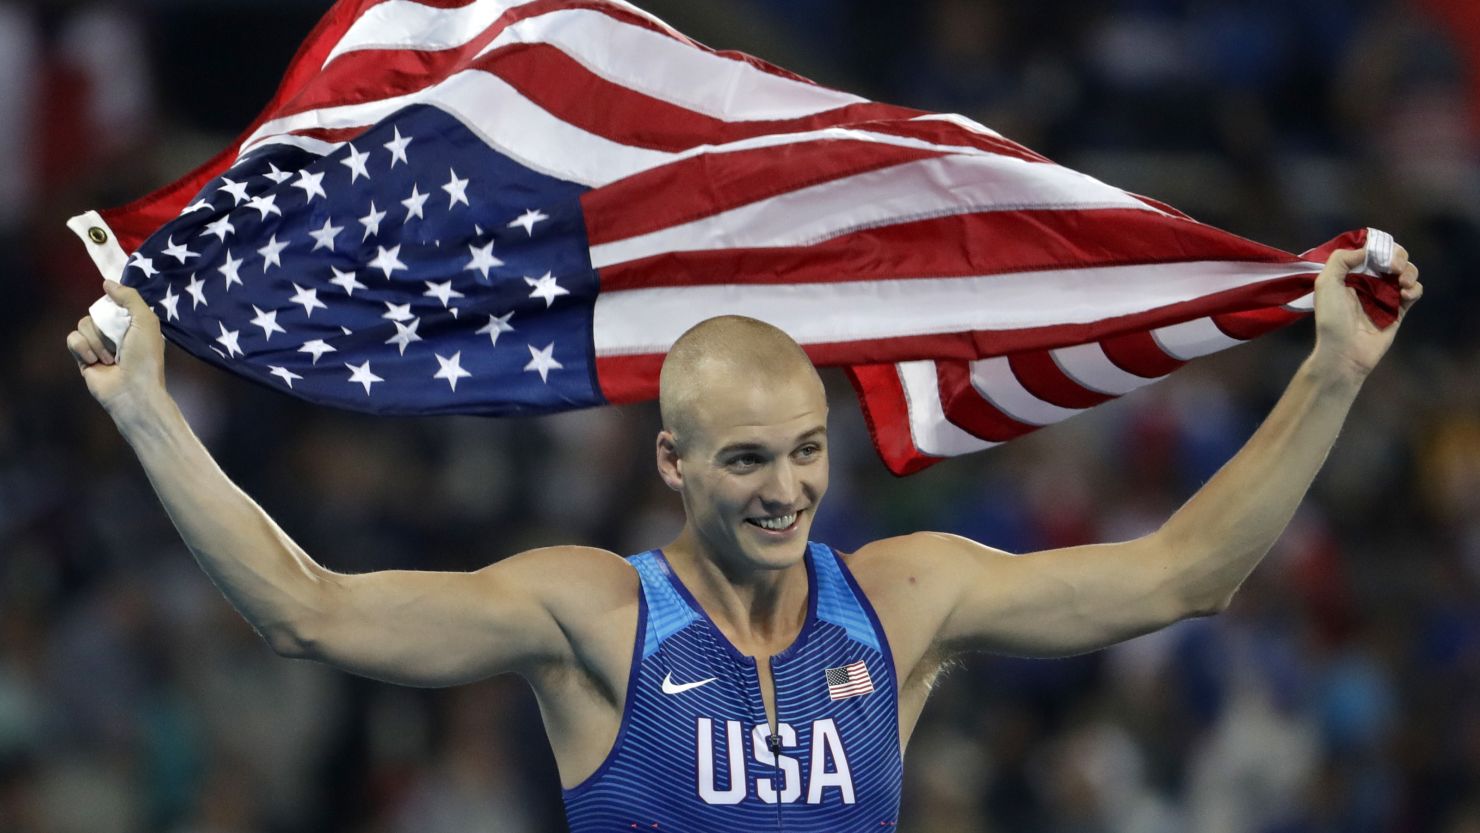 Bronze medal winner United States' Sam Kendricks celebrates after the final of the men's pole vault during the athletics competitions of the 2016 Summer Olympics at the Olympic stadium in Rio de Janeiro, Brazil, Monday, Aug. 15, 2016.